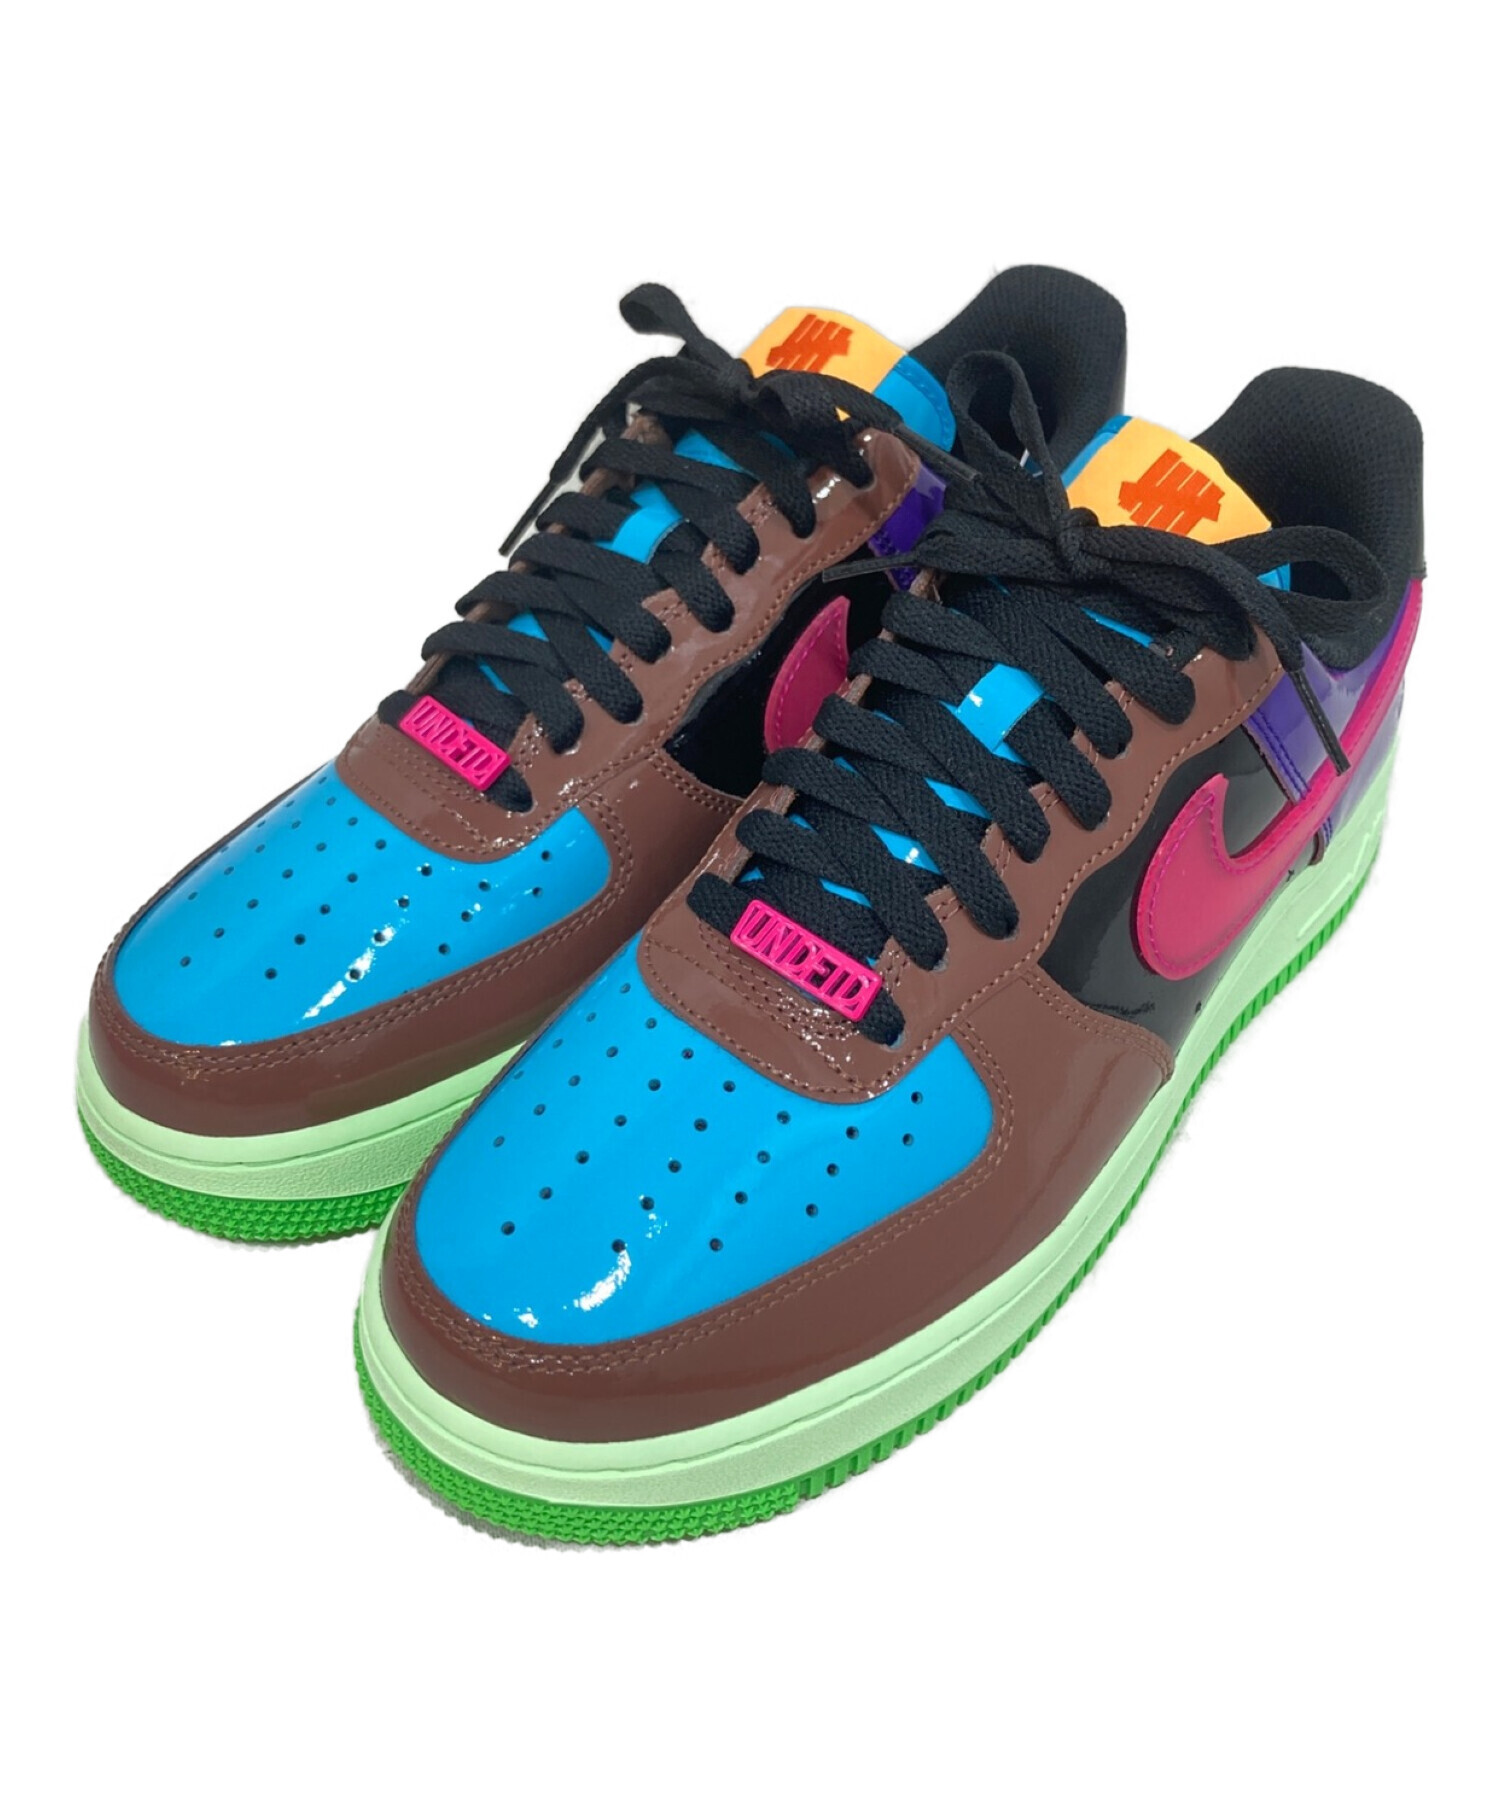 UNDEFEATED × Nike Air Force 1 Low SP ピンク265cm - スニーカー